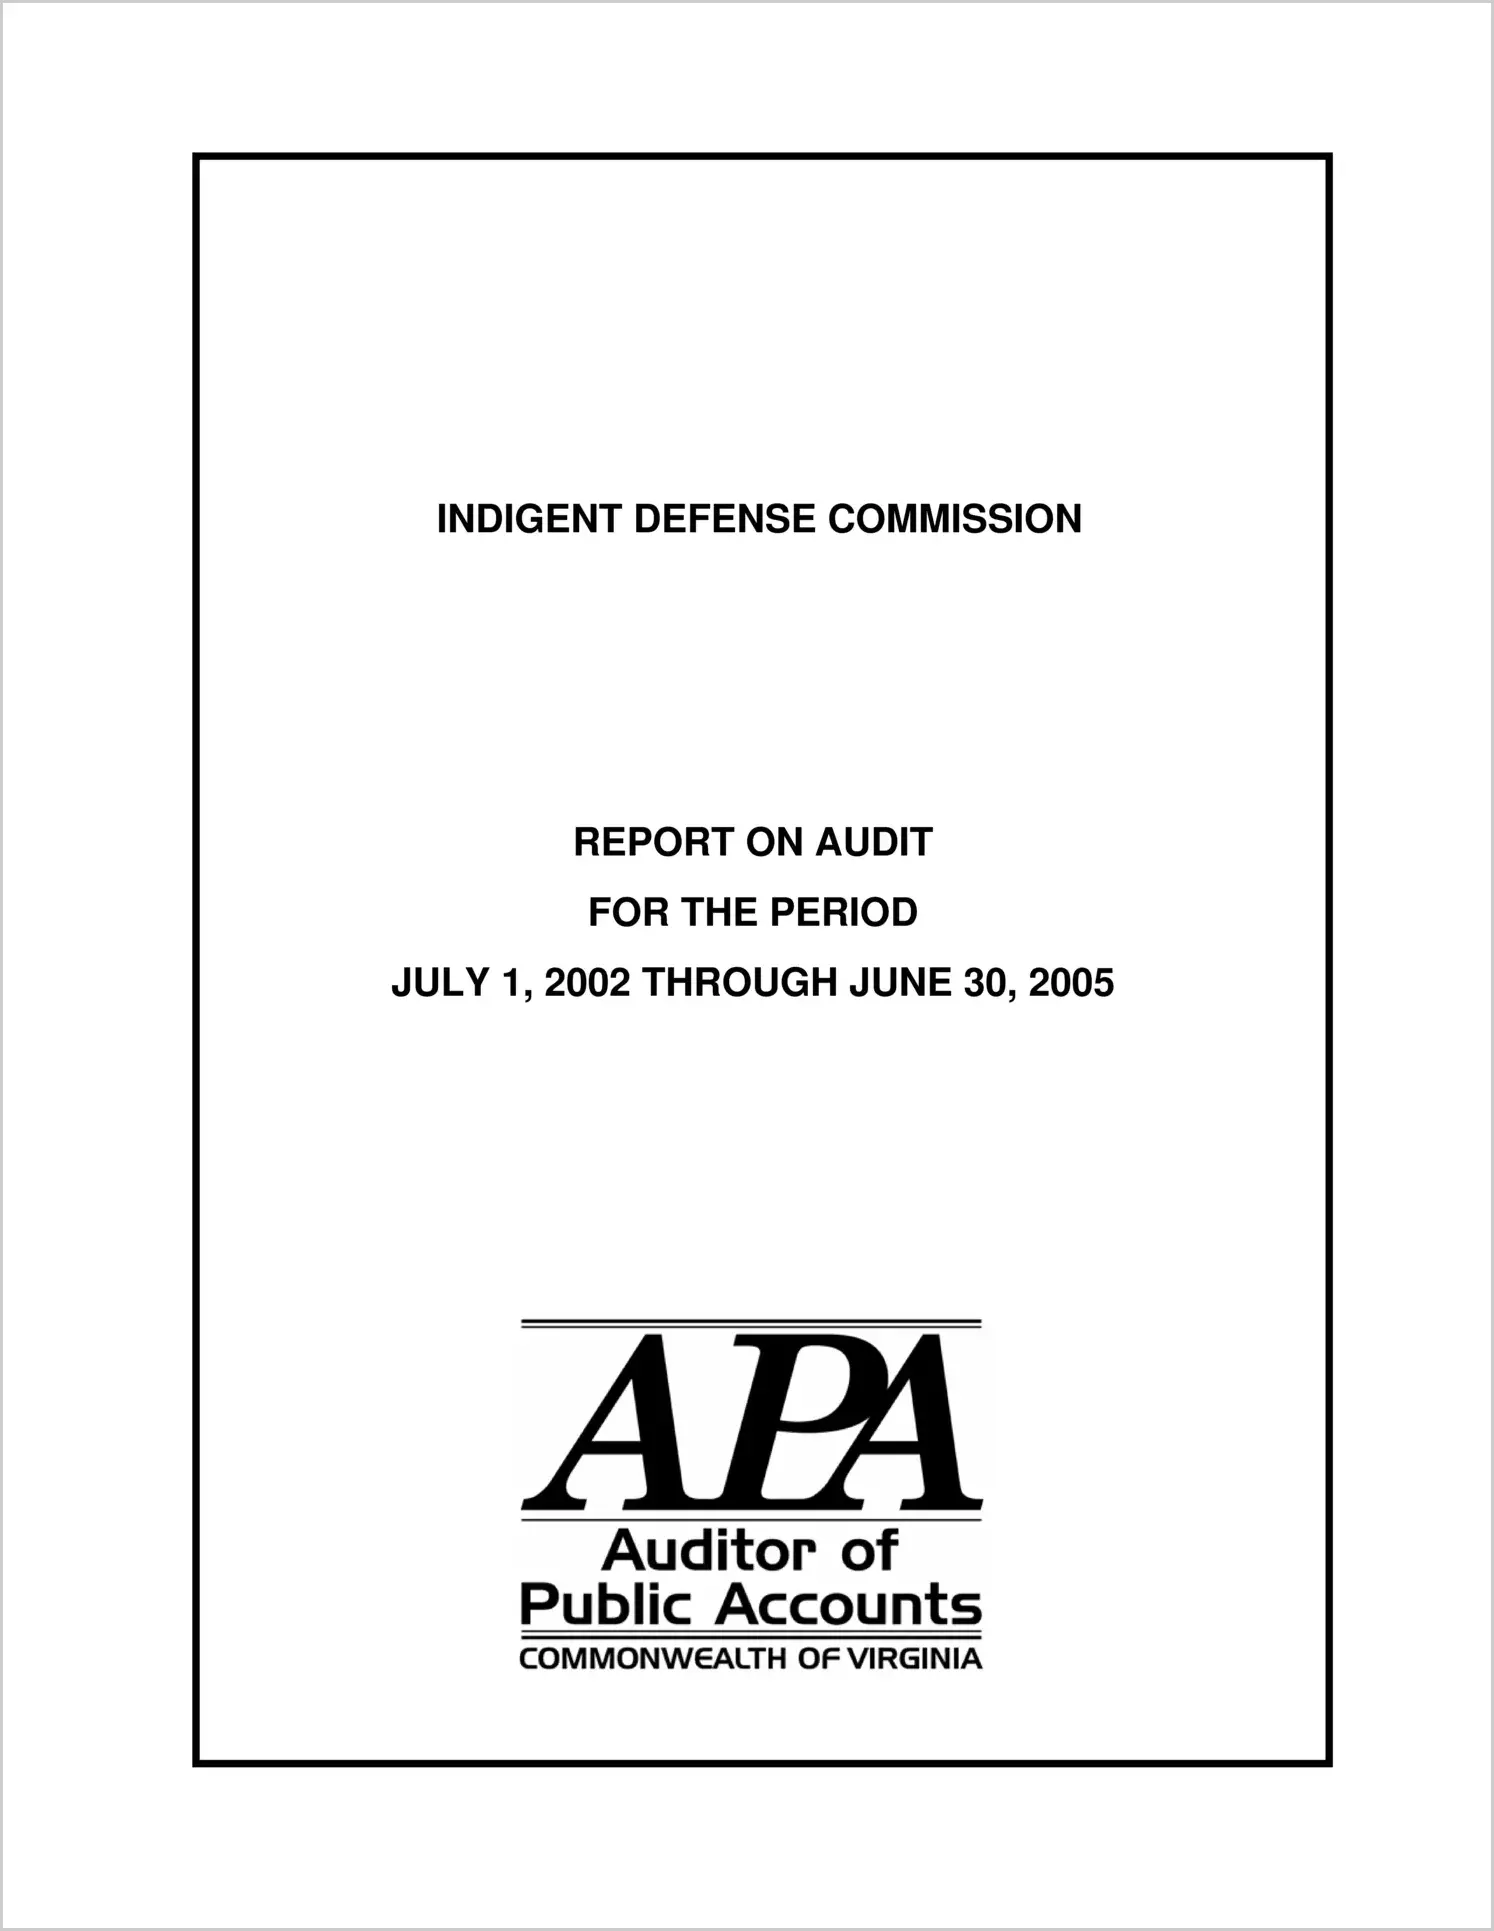 Indigent Defense Commission for the period July 1, 2002 through June 30, 2005